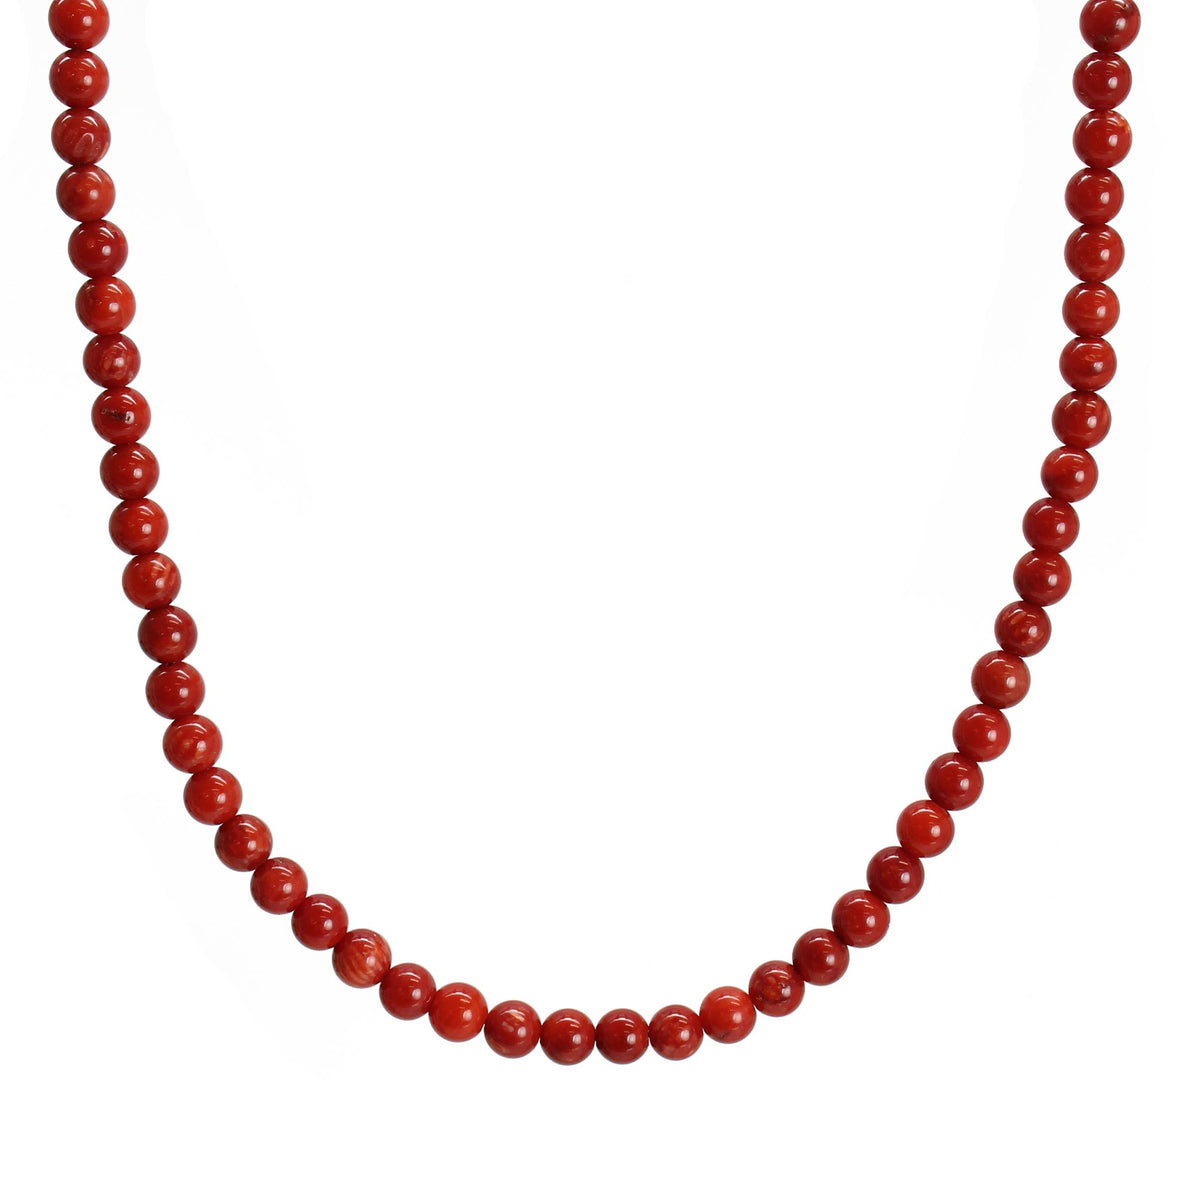 Red Coral Necklace, Small 4mm Beads, Sterling Silver Clasp